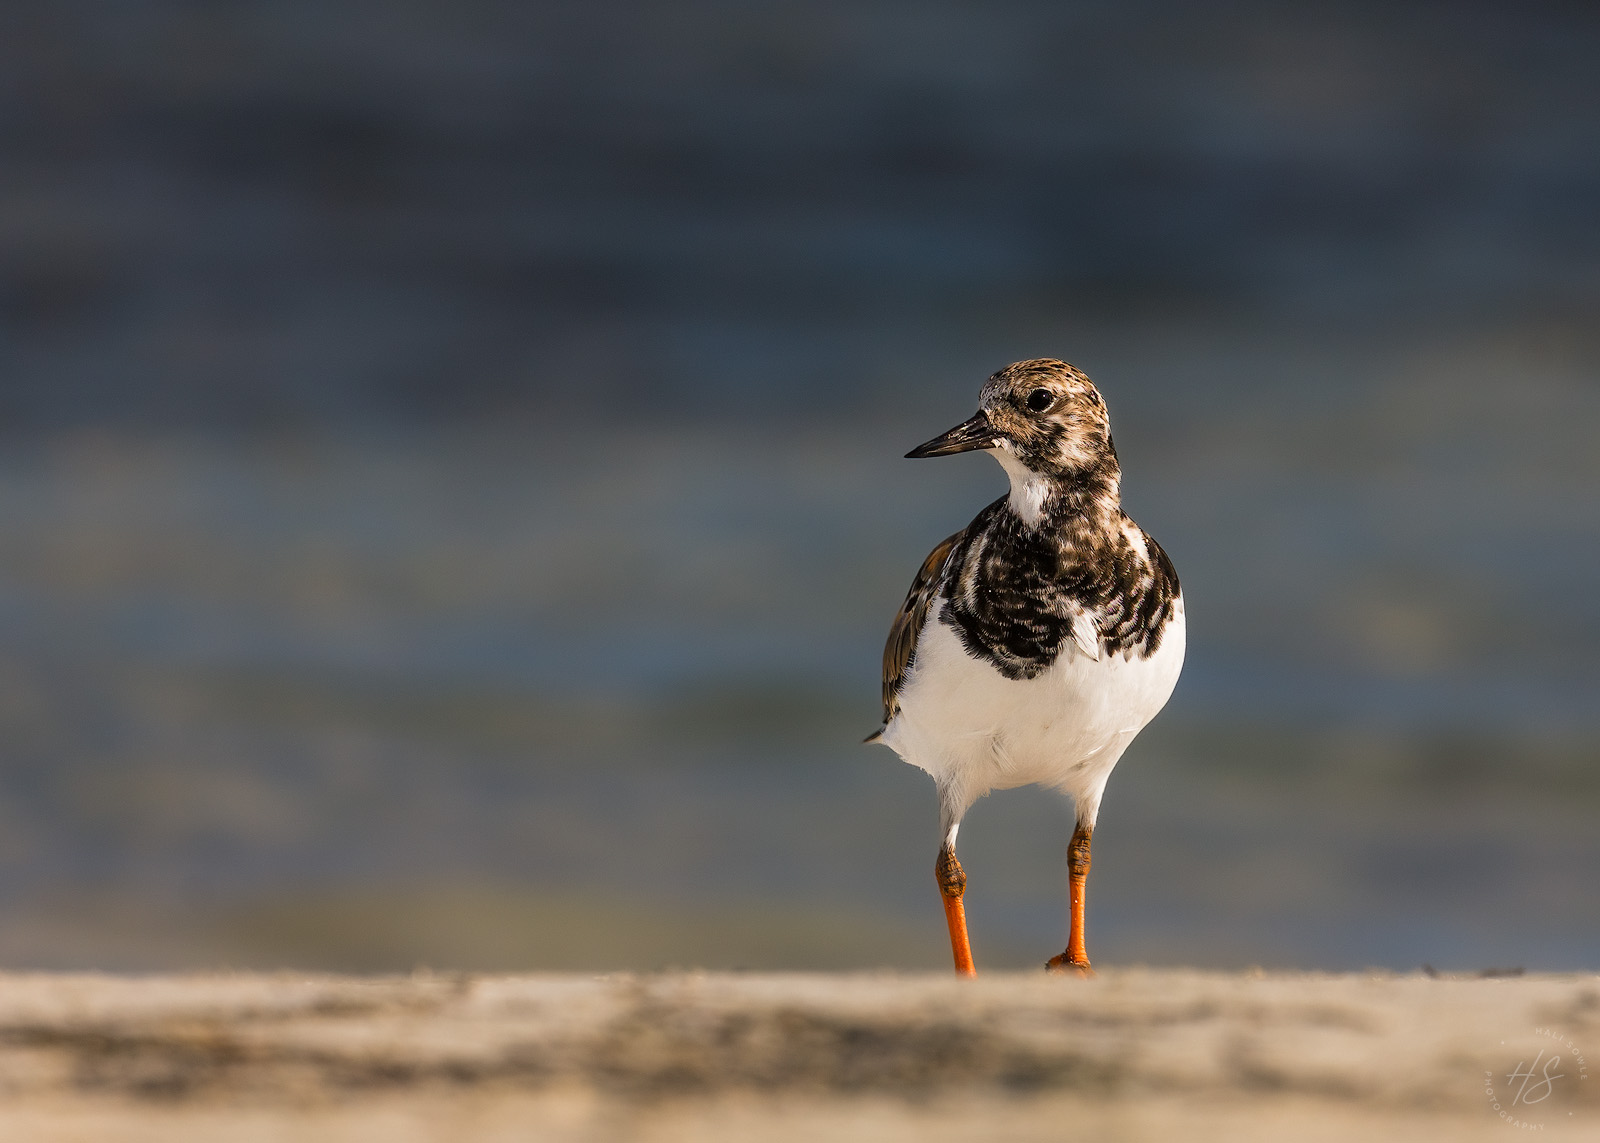 2021_09_SandalsSouthCoast-10605-Edit1600.jpg - A fine speciman of a Ruddy Turnstone.  They didn't stay still very often so I was lucky to catch this one on a 20 second pause.